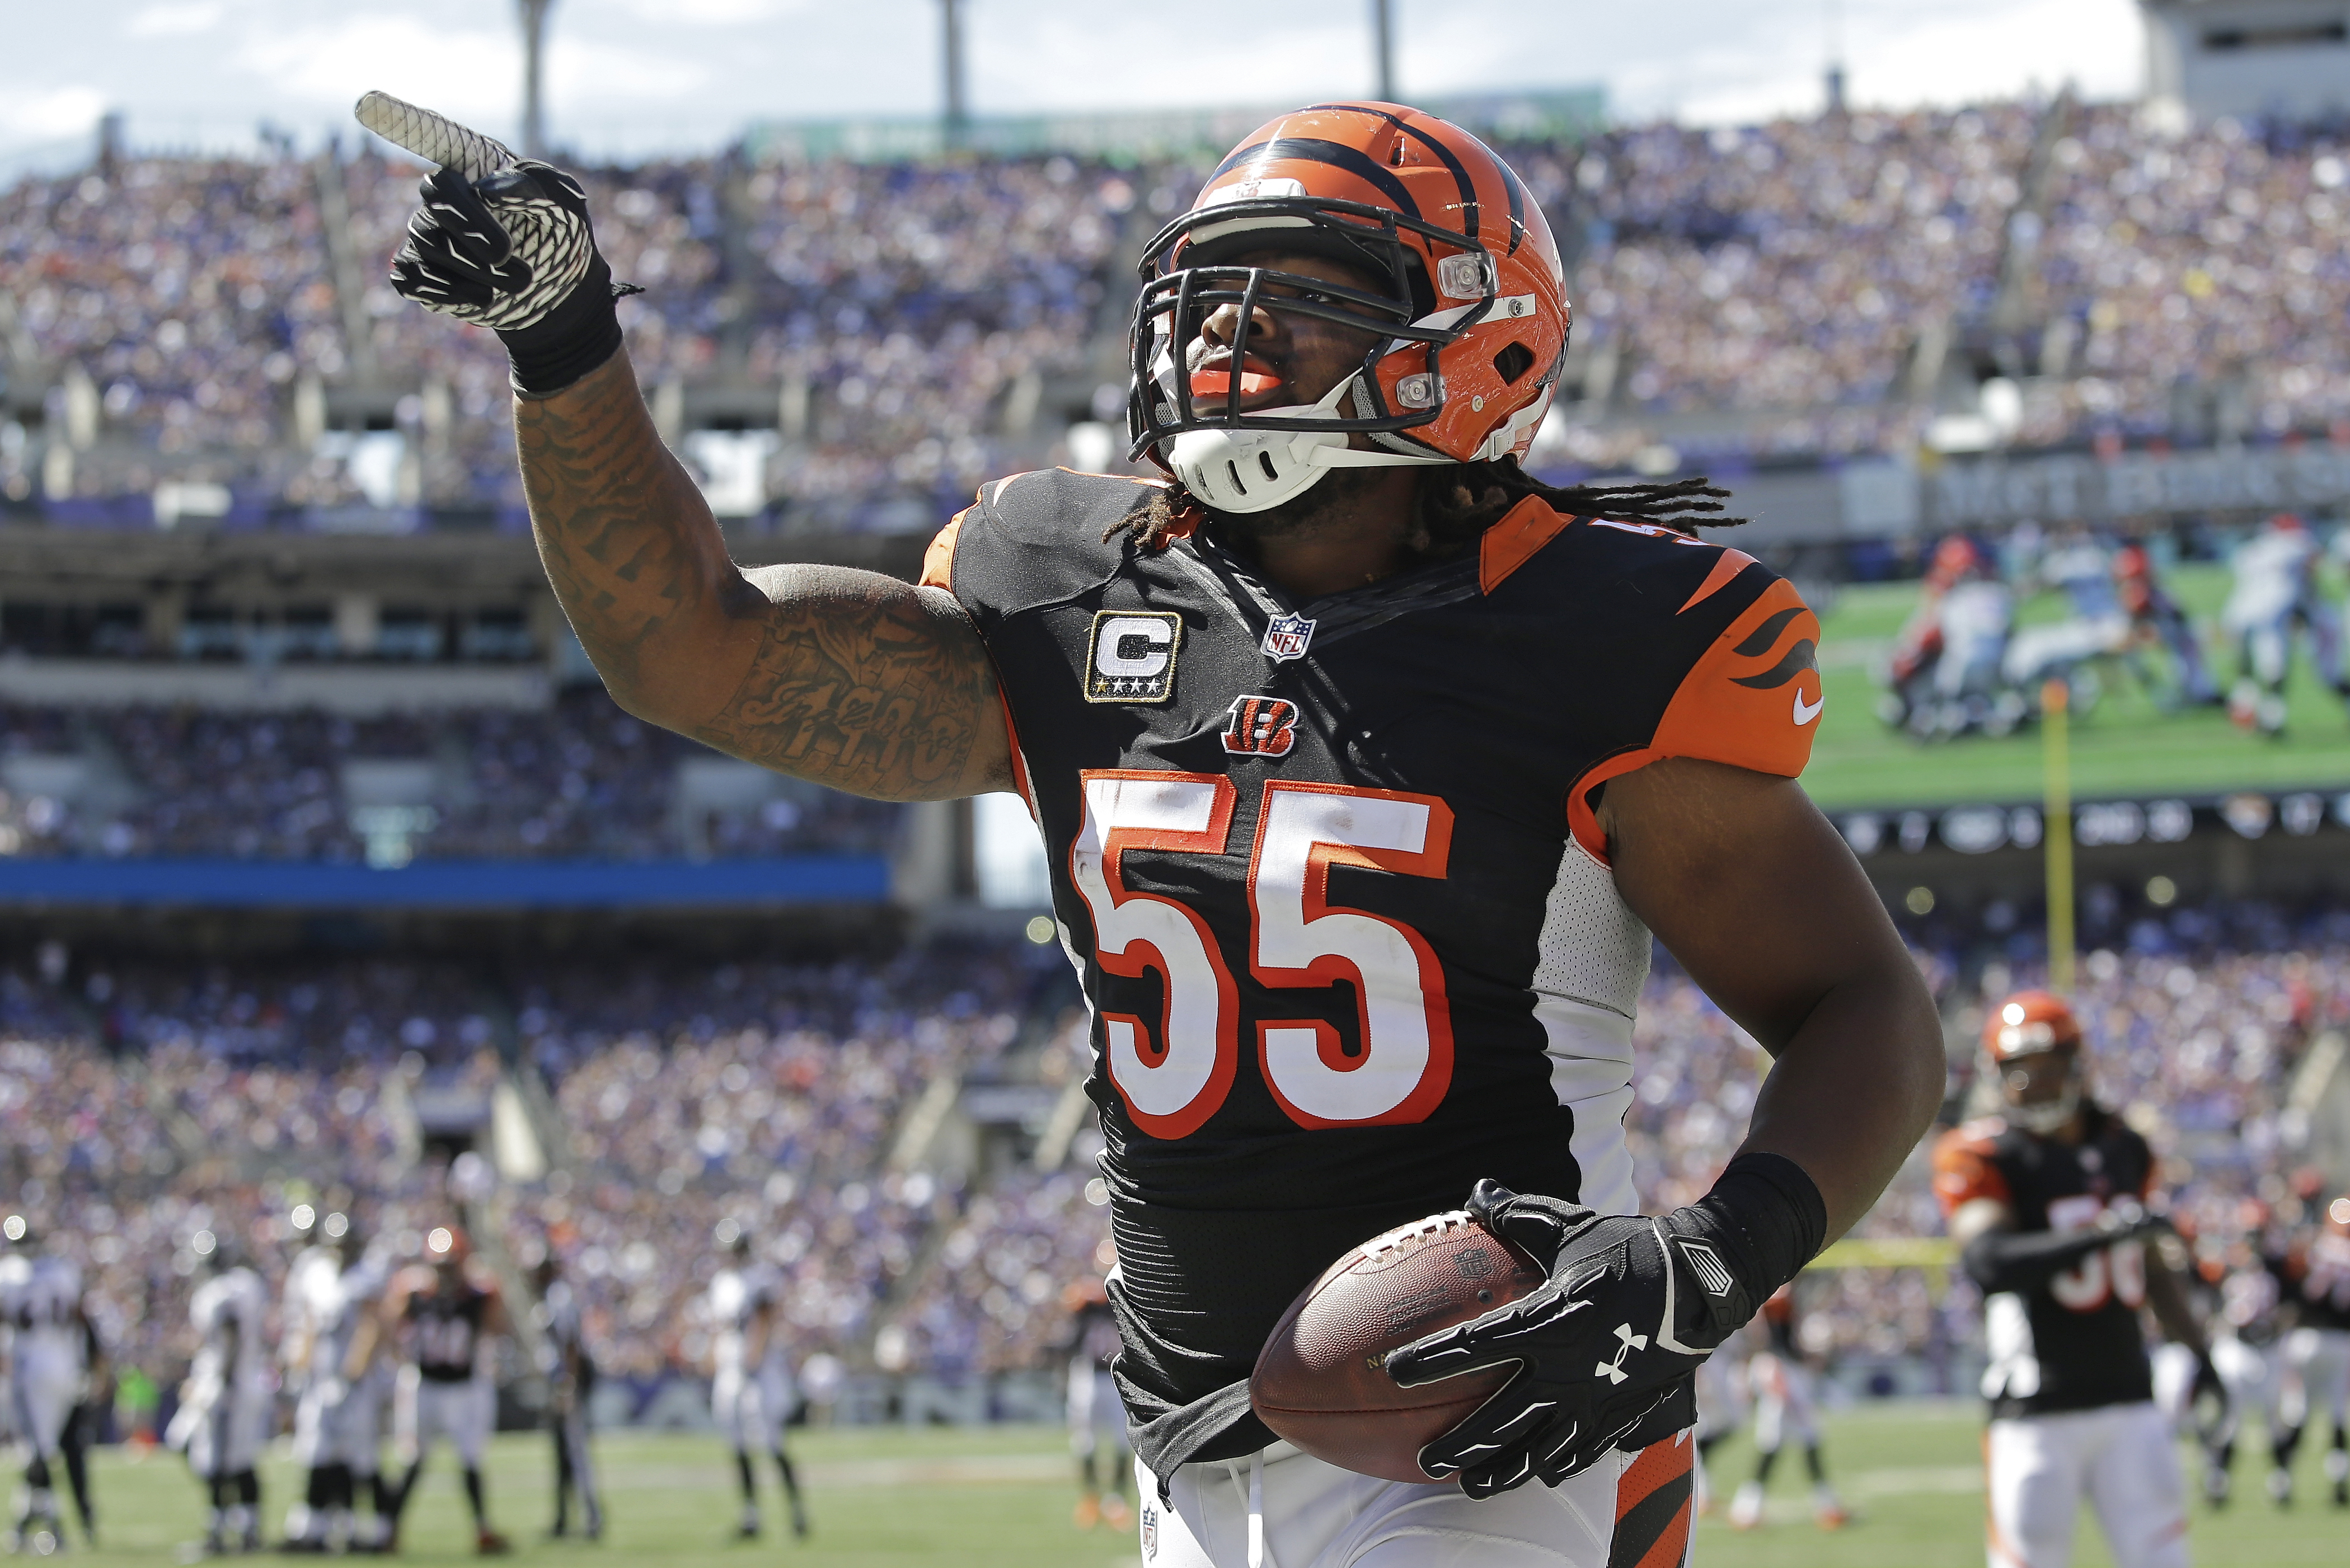 Panthers vs. Bengals Live Score and Analysis for Cincinnati Bleacher